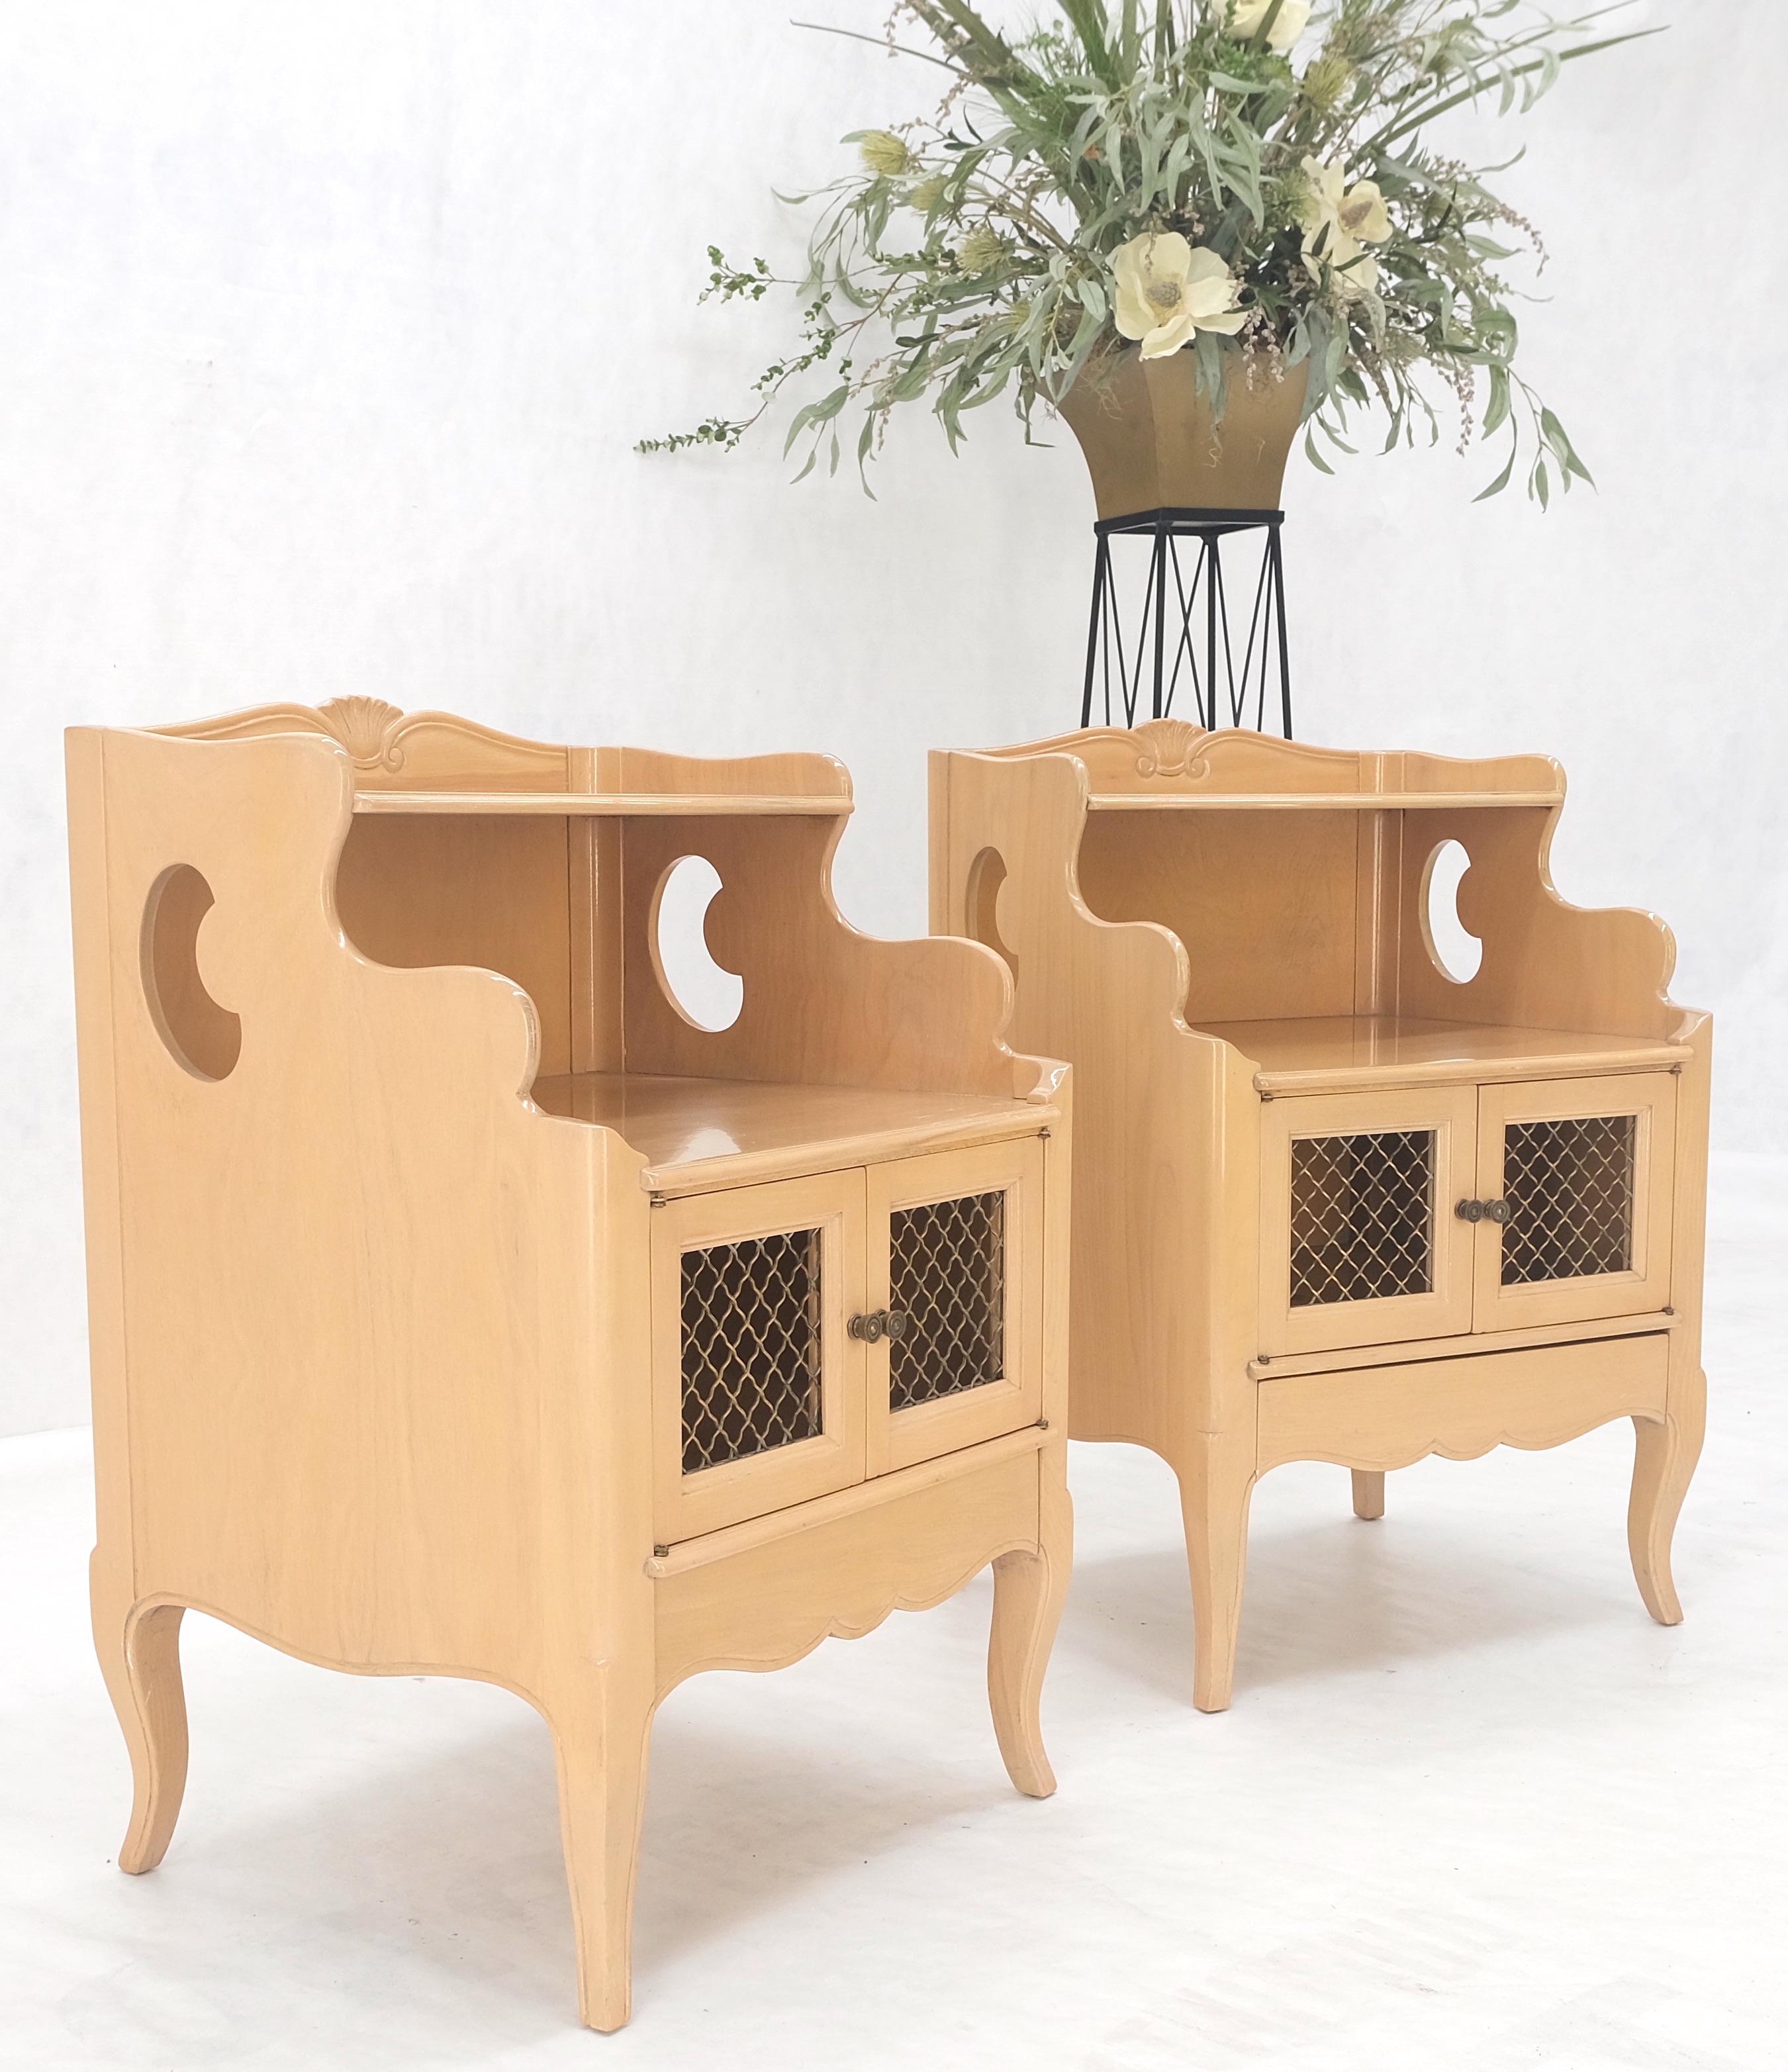 Brass Pair Lattice Doors End Tables Night Stands White Wash Finish French Provincial! For Sale